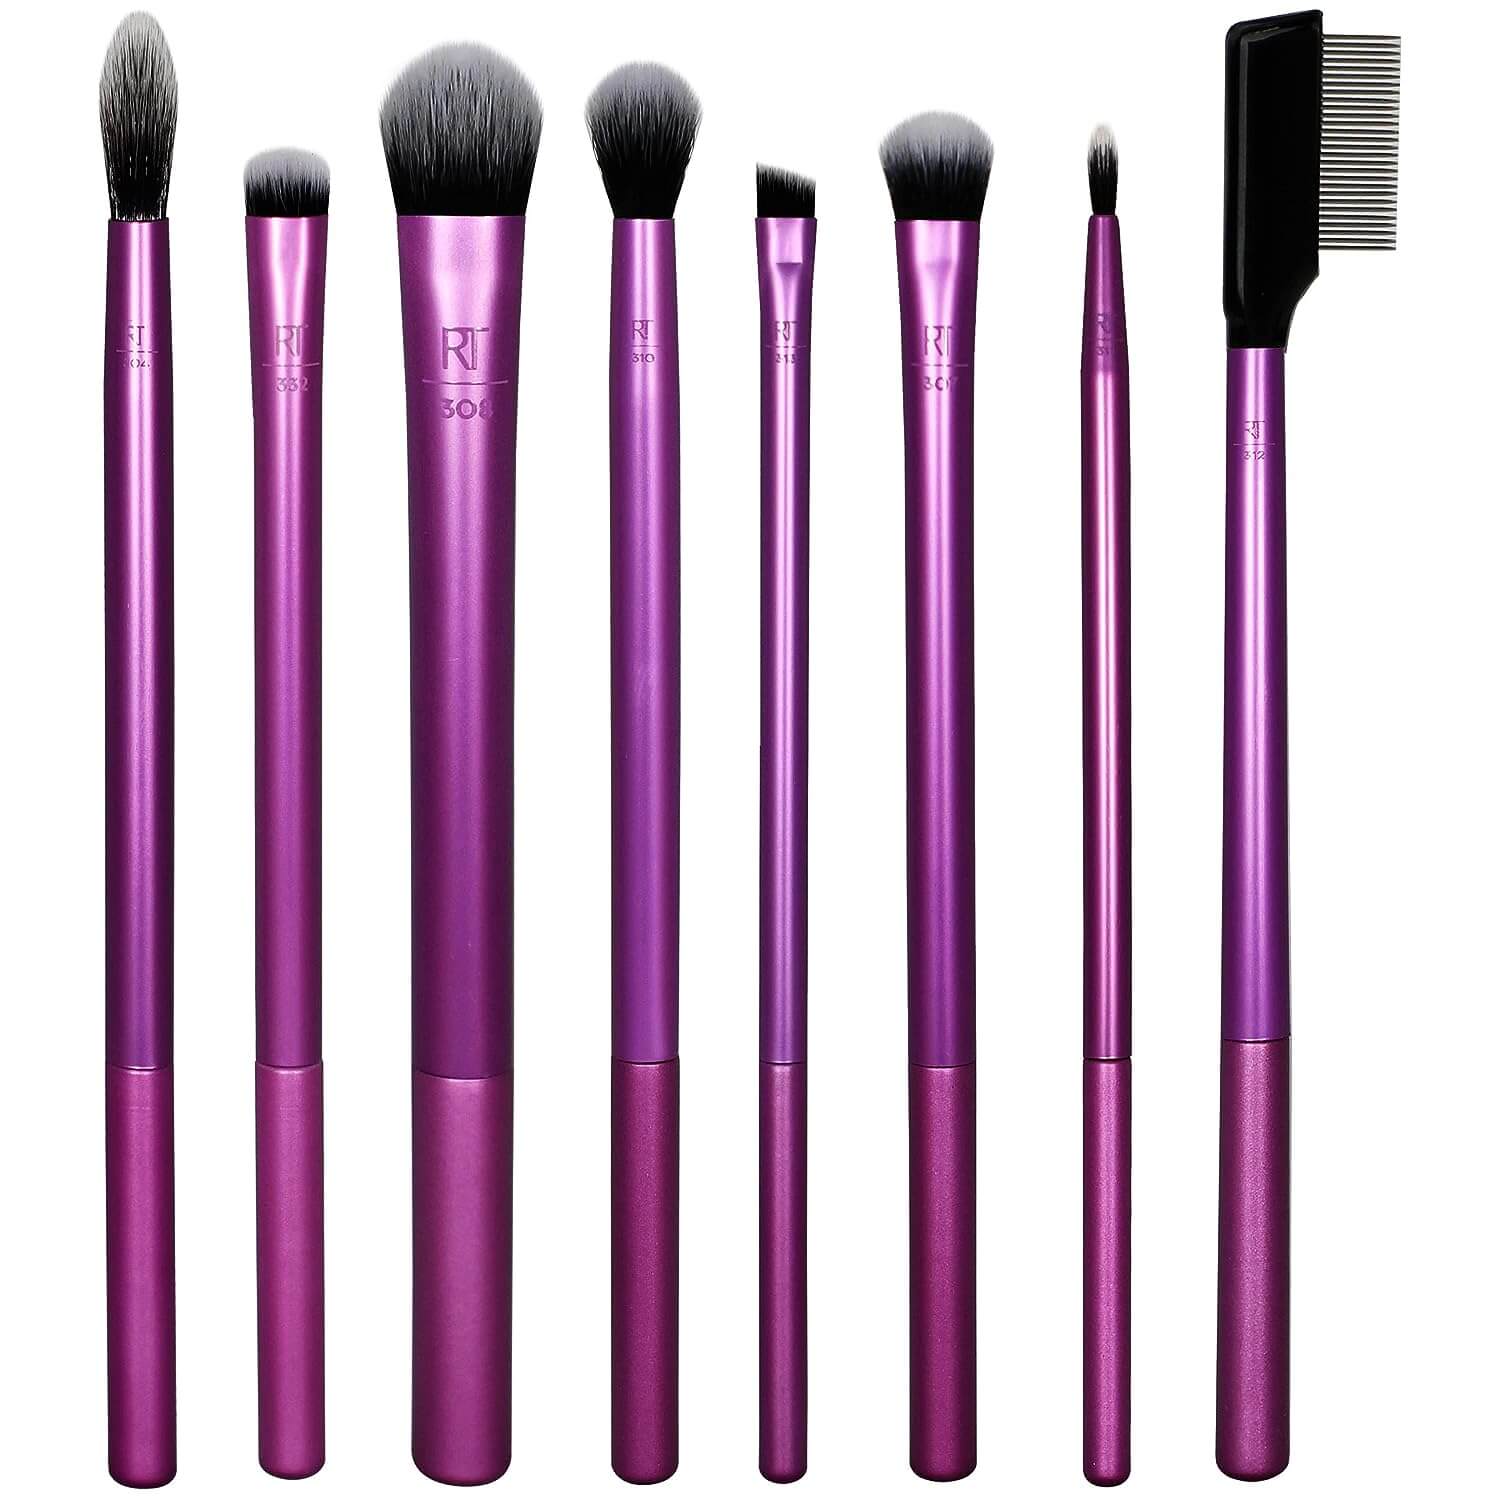 shop real technique eye makeup brush set available at Heygirl.pk for delivery in Pakistan